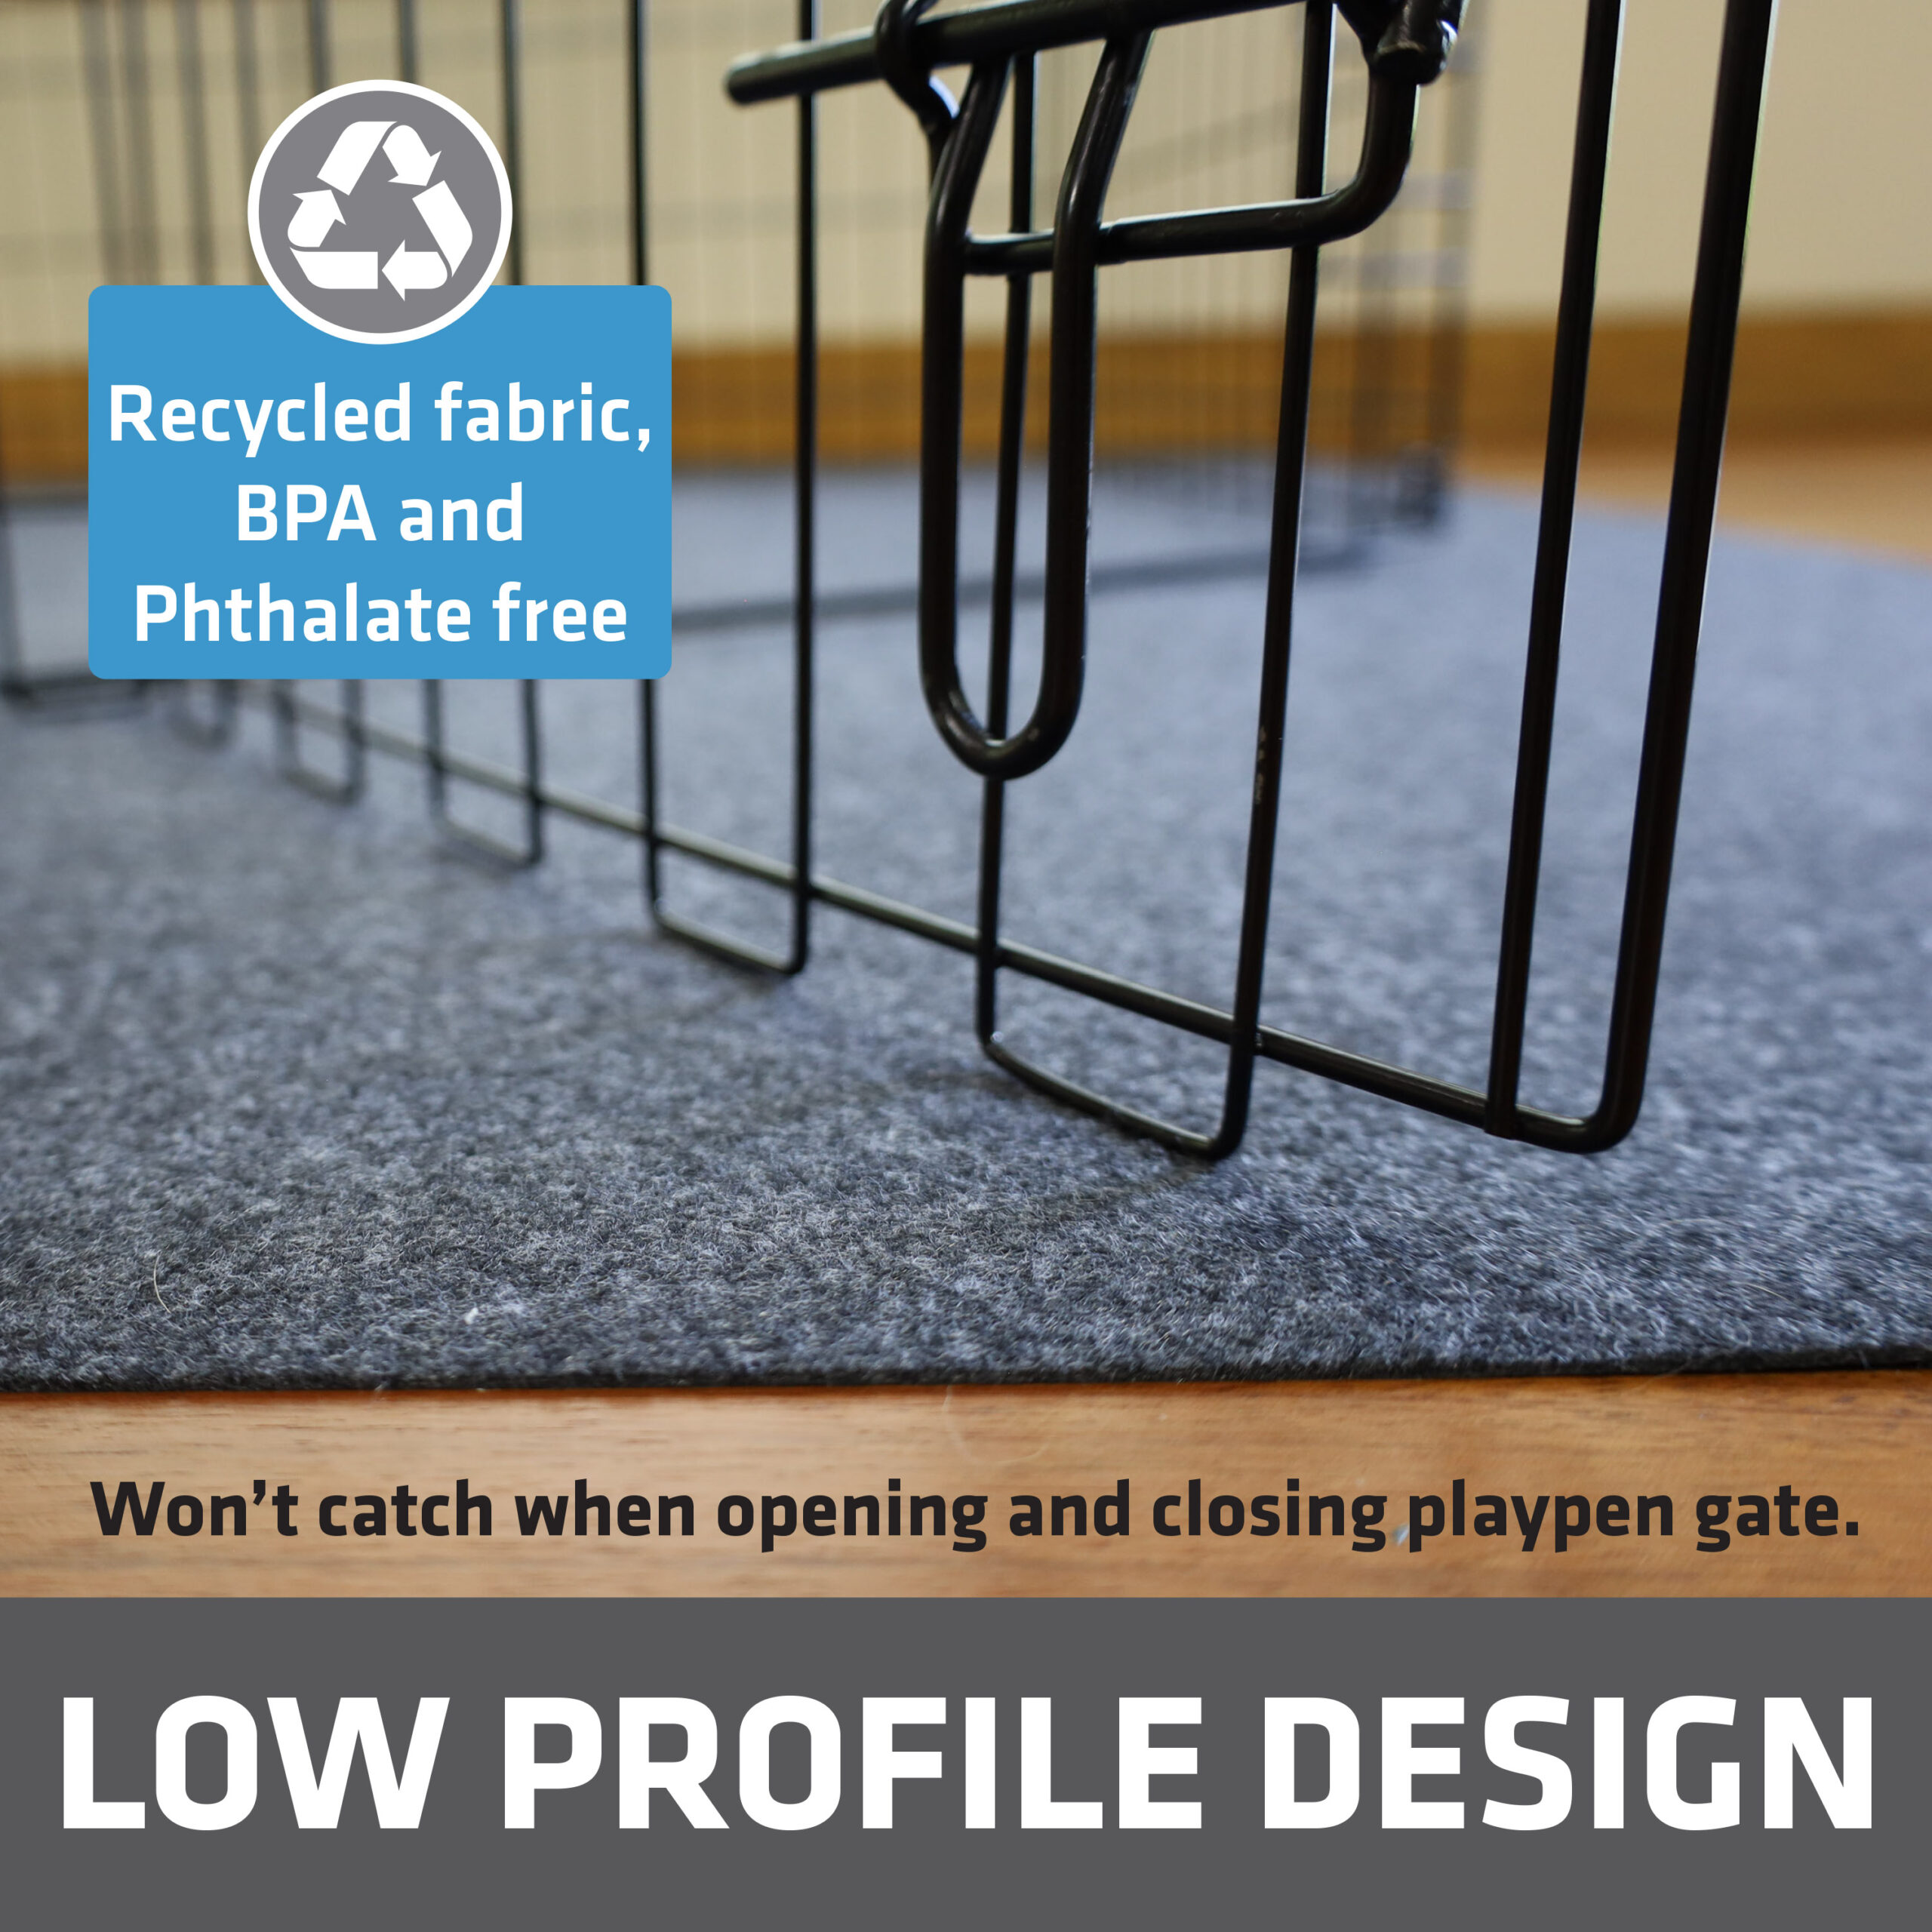 https://drymate.com/wp-content/uploads/2021/07/7-Low-Profile-Design_Dog-Playpen_Recycled-scaled.jpg